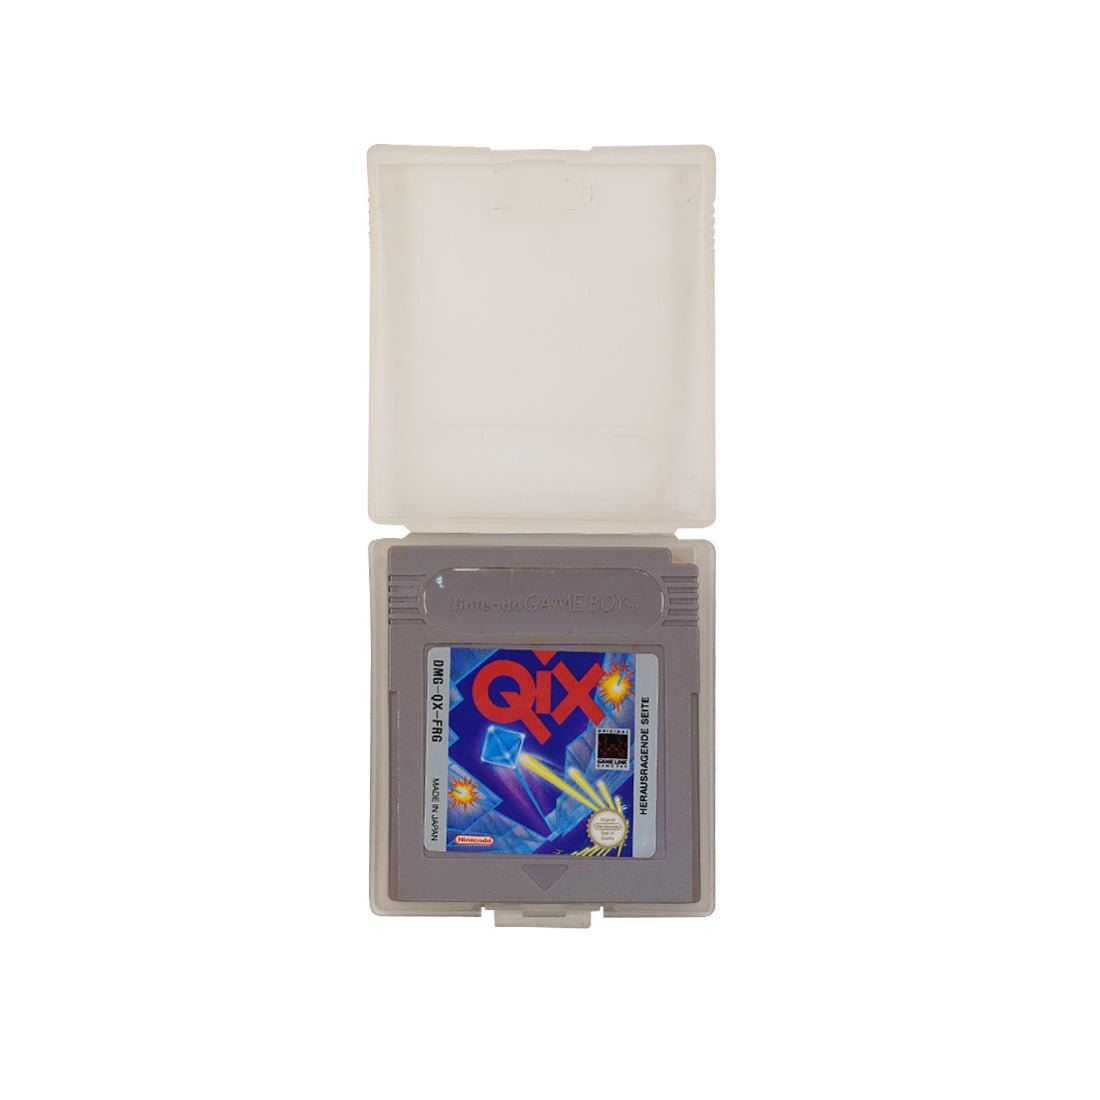 (Pre-Owned) Qix - Gameboy Color - ريترو - Store 974 | ستور ٩٧٤